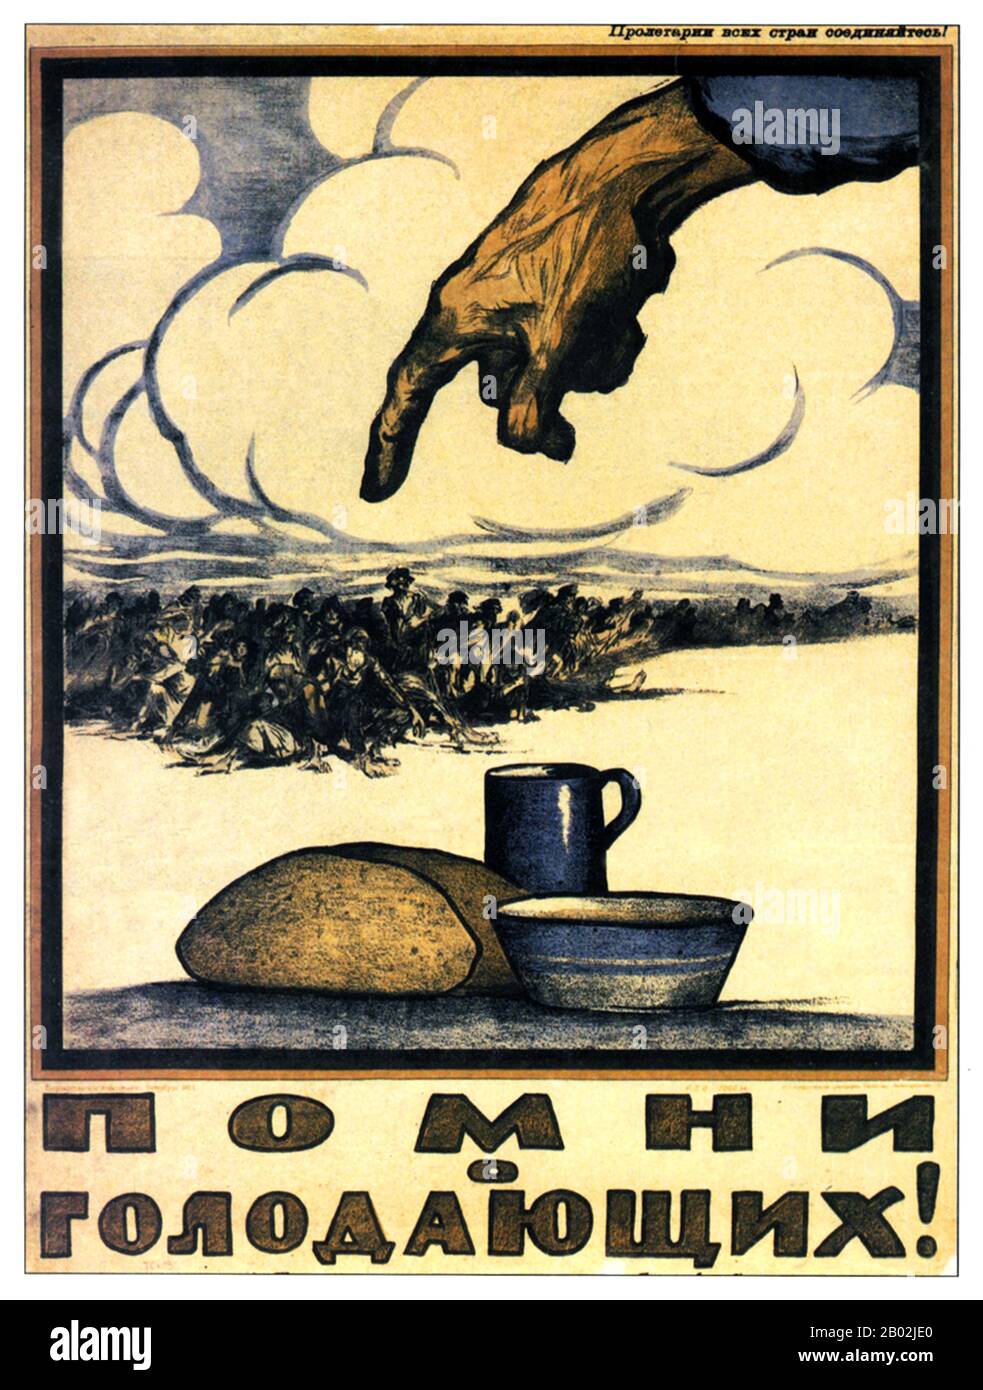 The Russian famine of 1921, also known as Povolzhye famine, which began in the early spring of that year and lasted through 1922, was a severe famine that occurred in Bolshevik Russia. The famine, which killed an estimated 6 million people, affected mostly the Volga and Ural River region.  The famine resulted from the combined effect of economic disturbance, which had already started during World War I, and continued through the disturbances of the Russian Revolution of 1917 and Russian Civil War with its policy of War Communism, especially prodrazvyorstka, aided furthermore by rail systems th Stock Photo